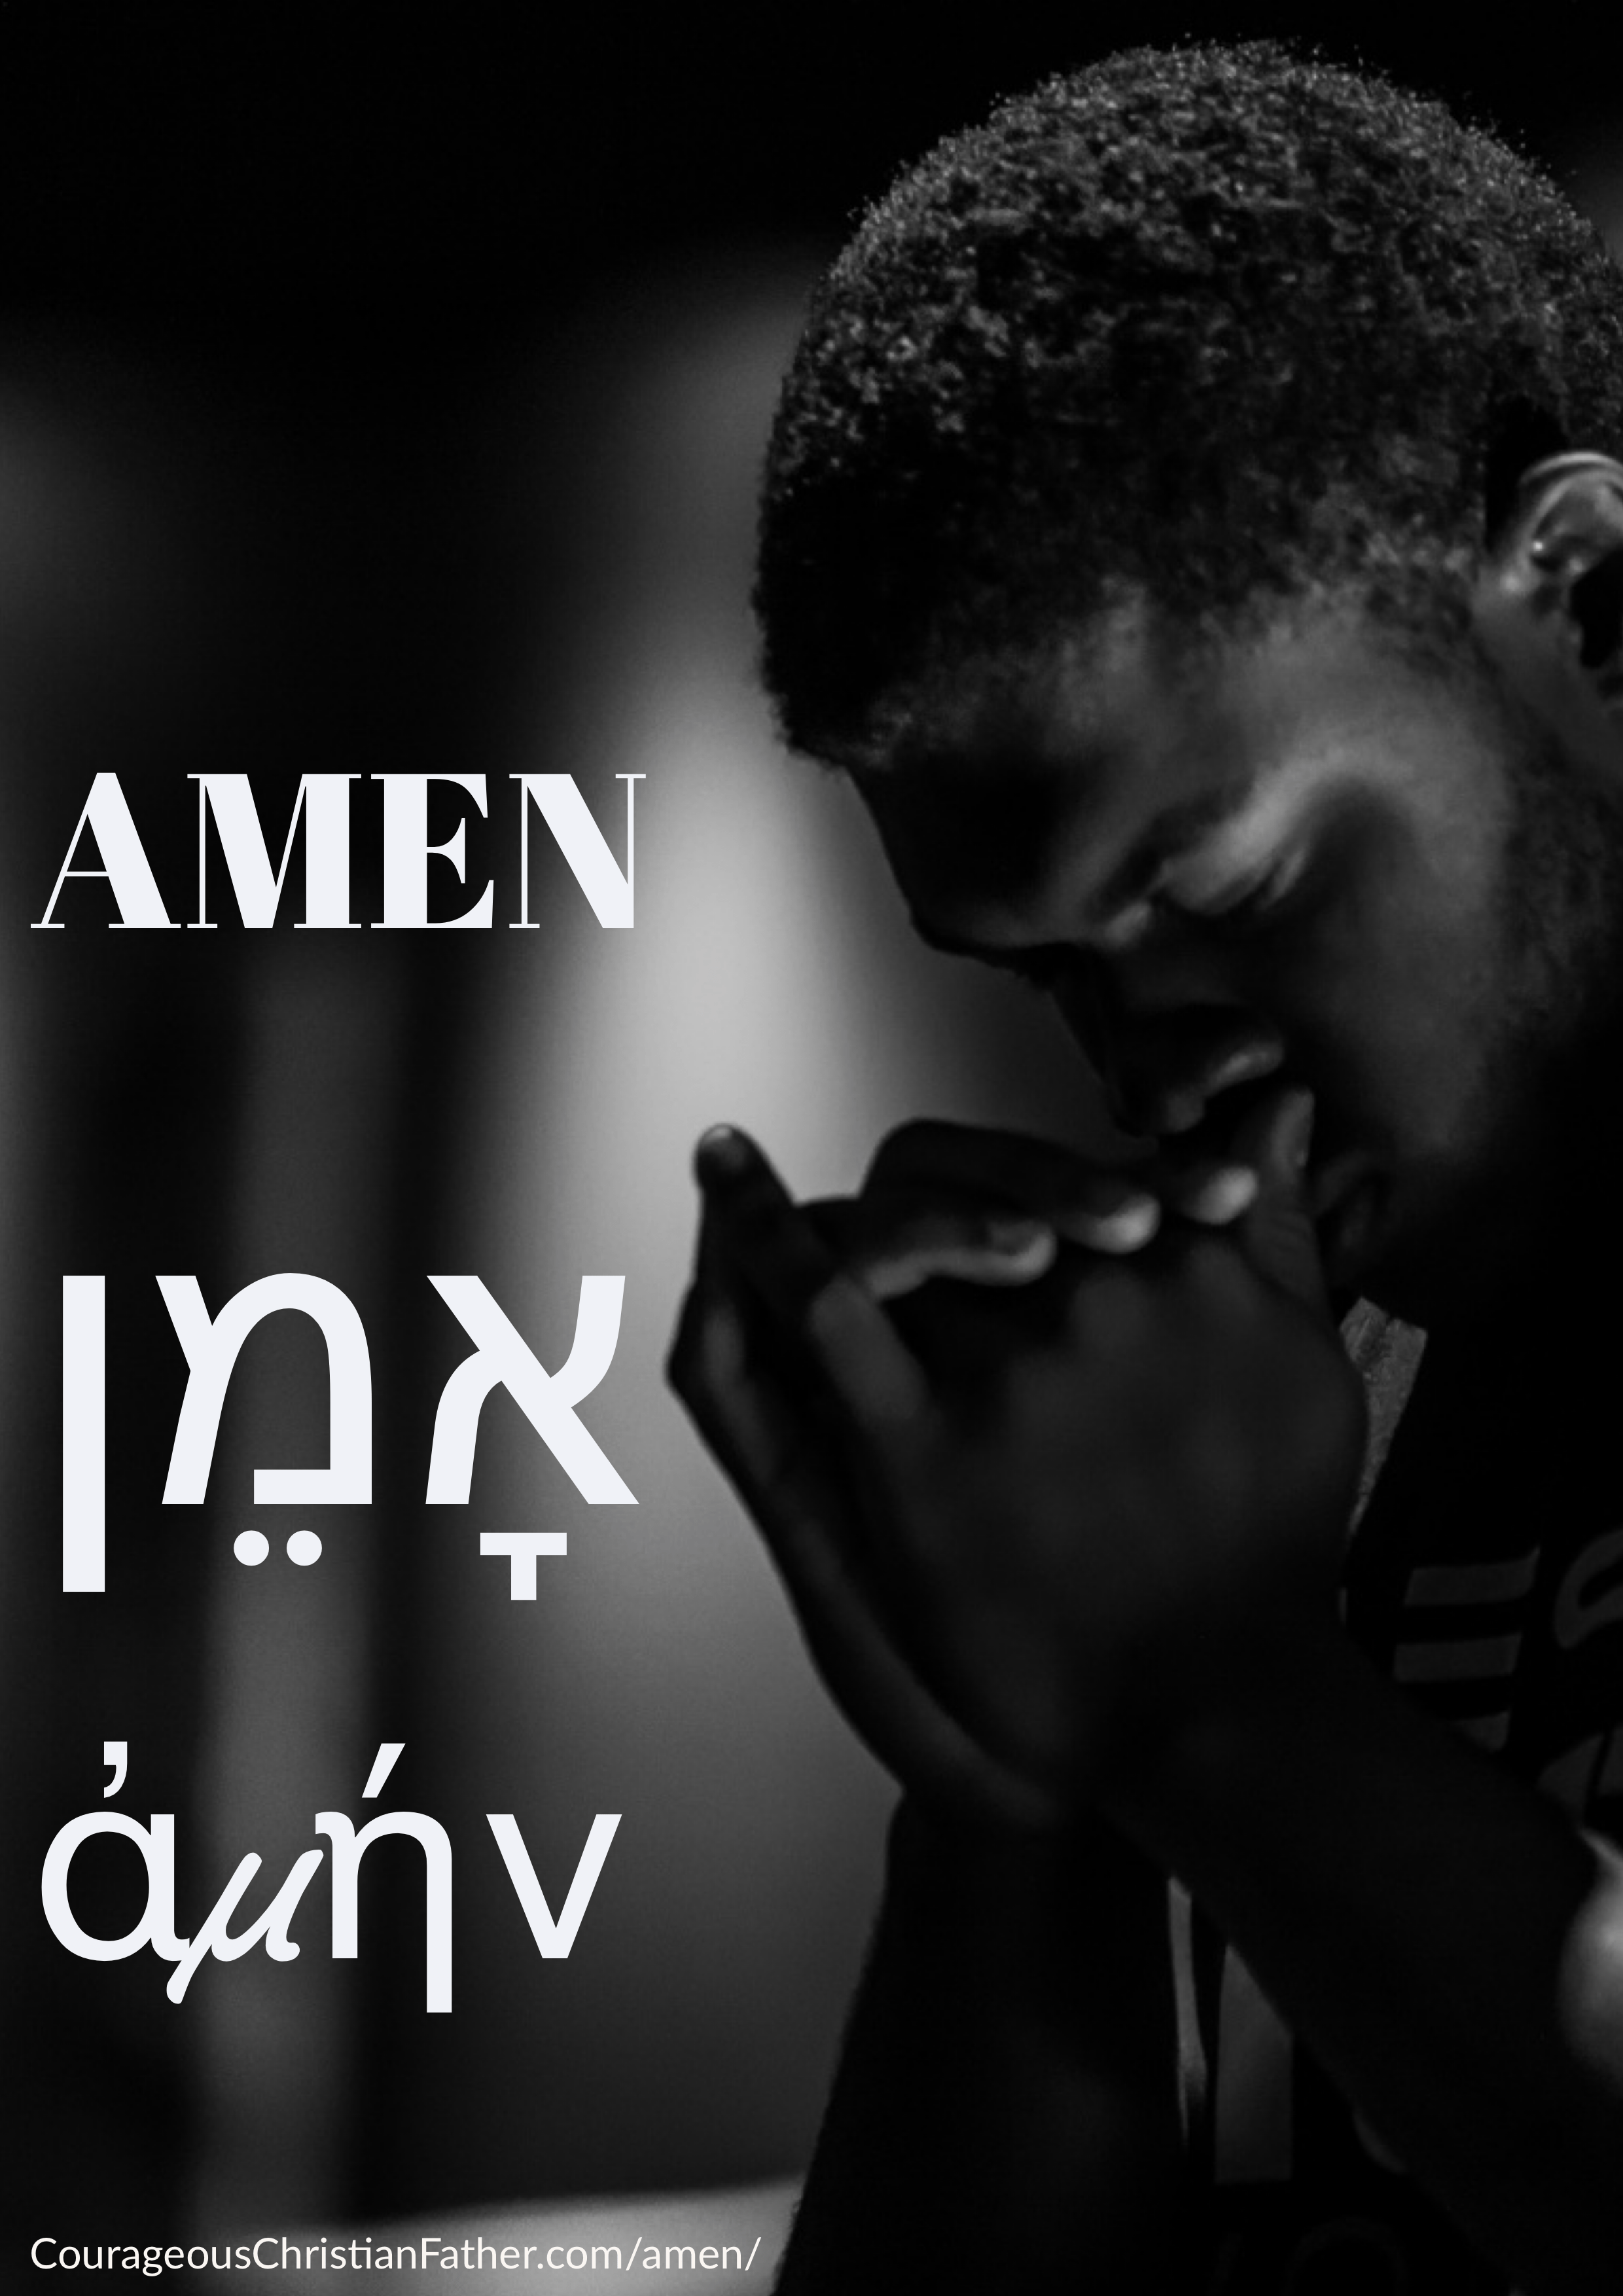 Amen ἀμήν אָמֵן - A word in the Bible, often we use it to end a prayer or agree with what the pastor or speaker says. So what does the word truly mean? #Amen